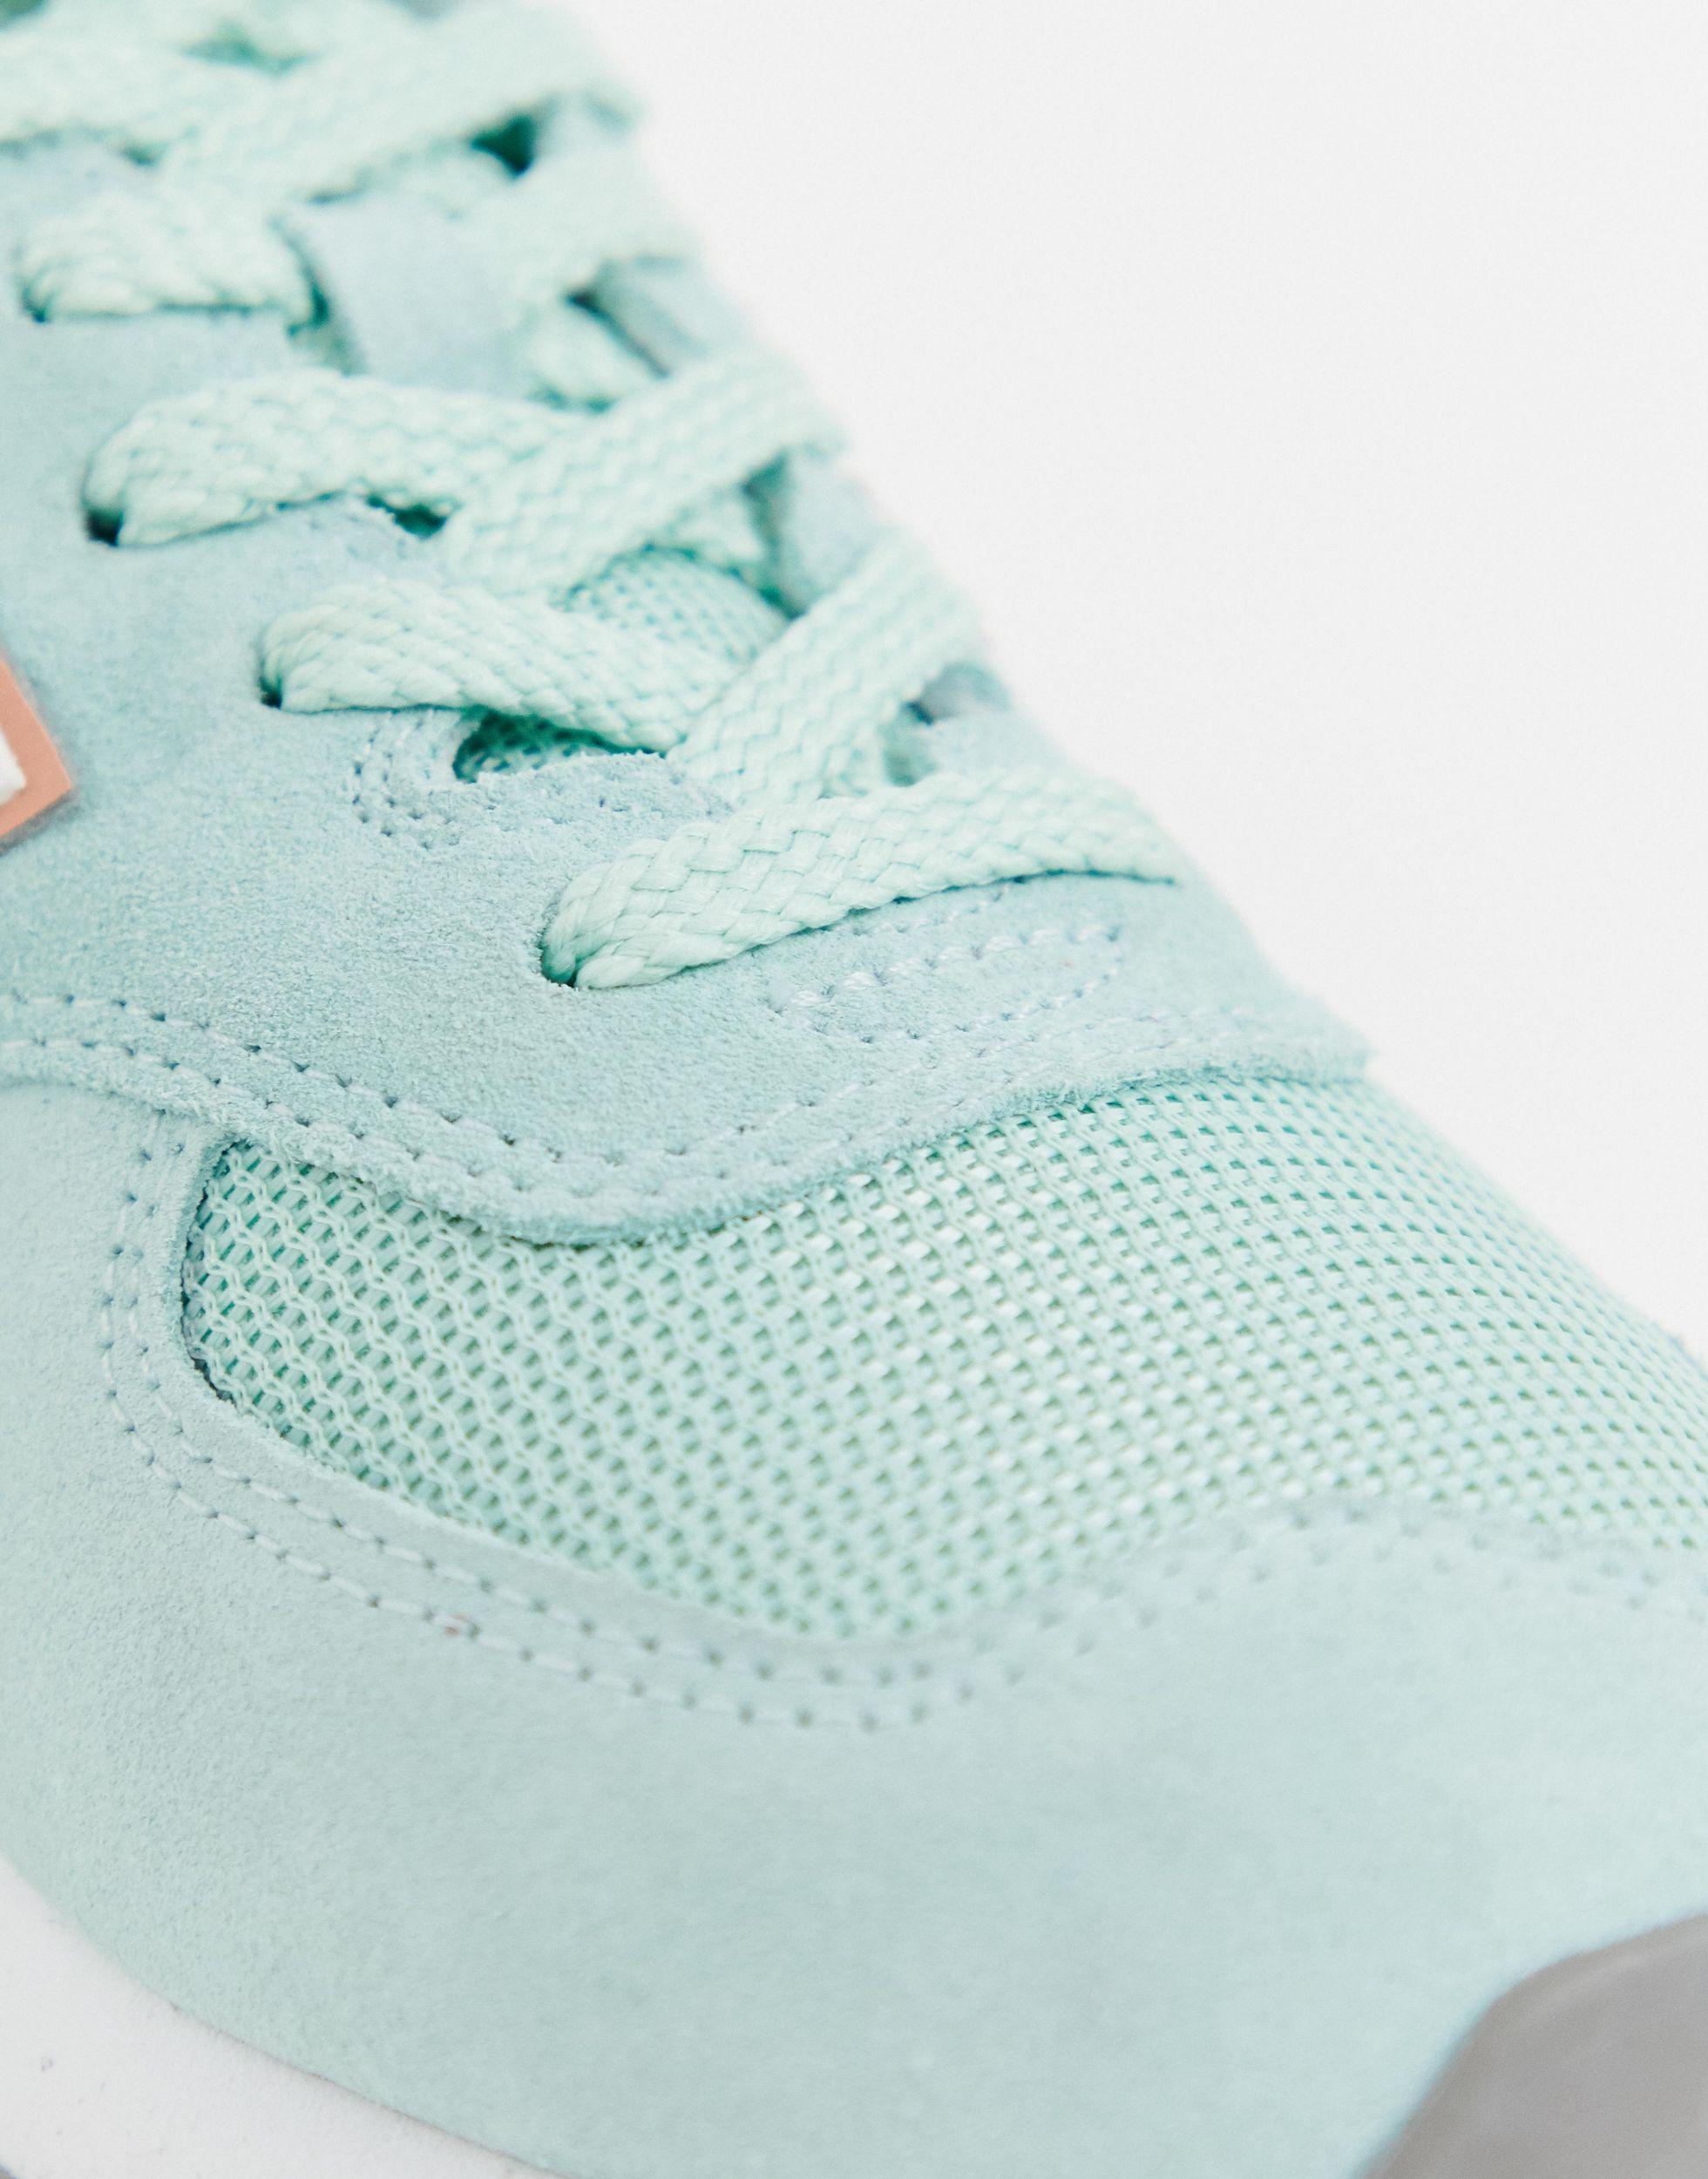 New Balance Rubber 574 V2 Pastel Mint Sneakers in Green | Lyst